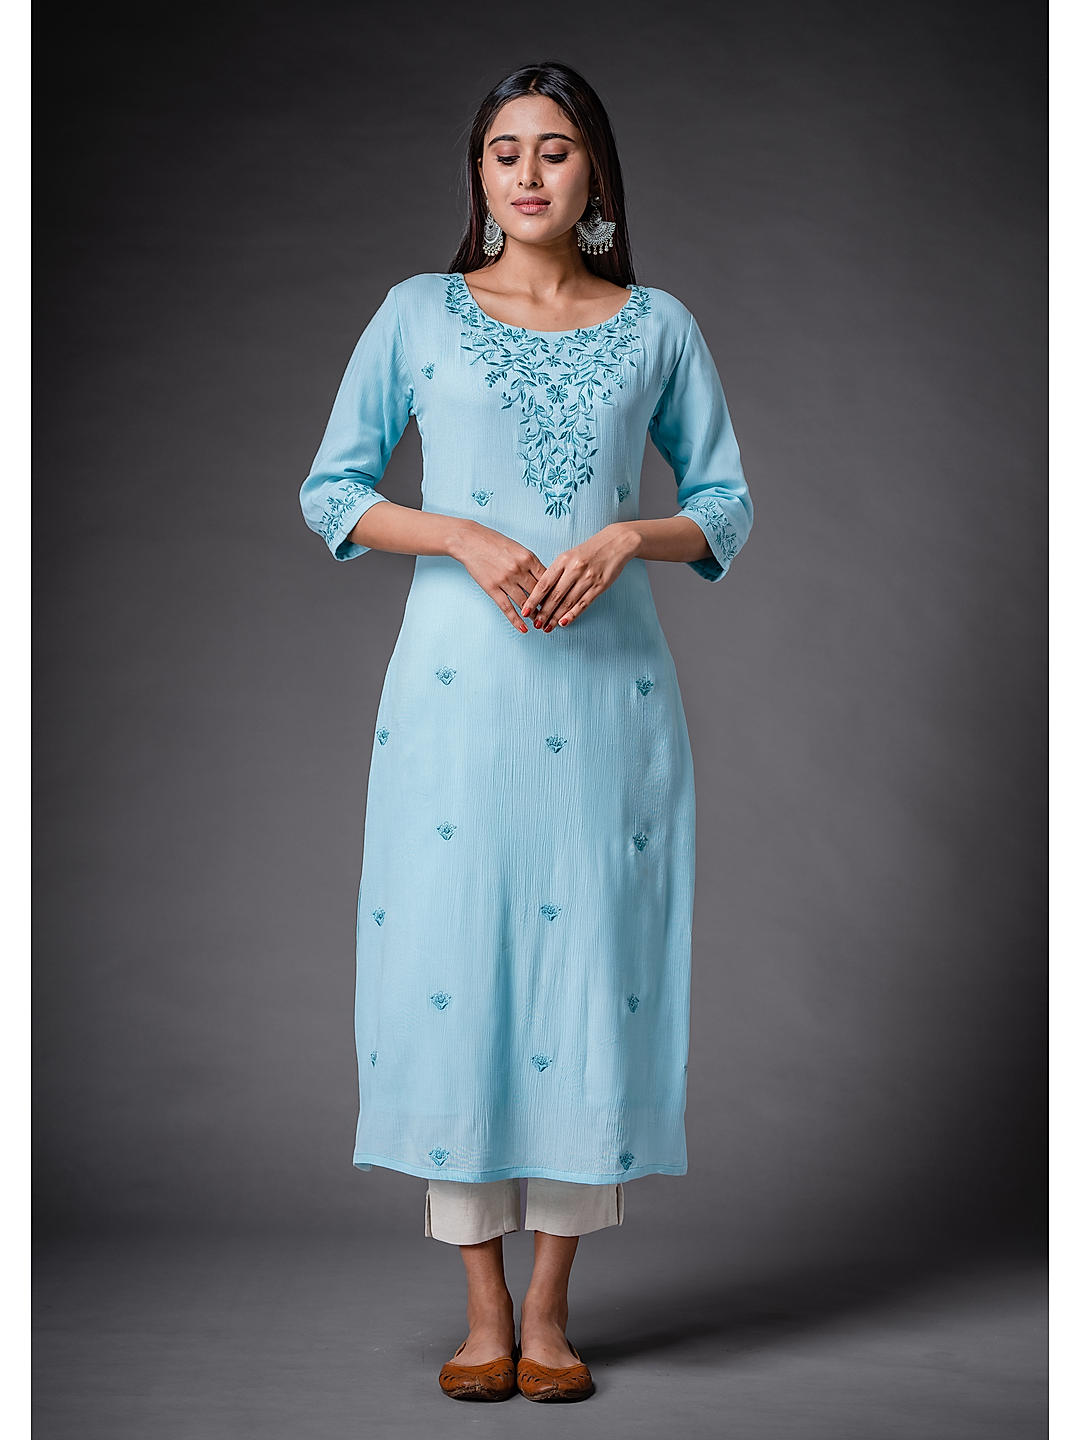 Royal Blue Festive Kurtis Online Shopping for Women at Low Prices